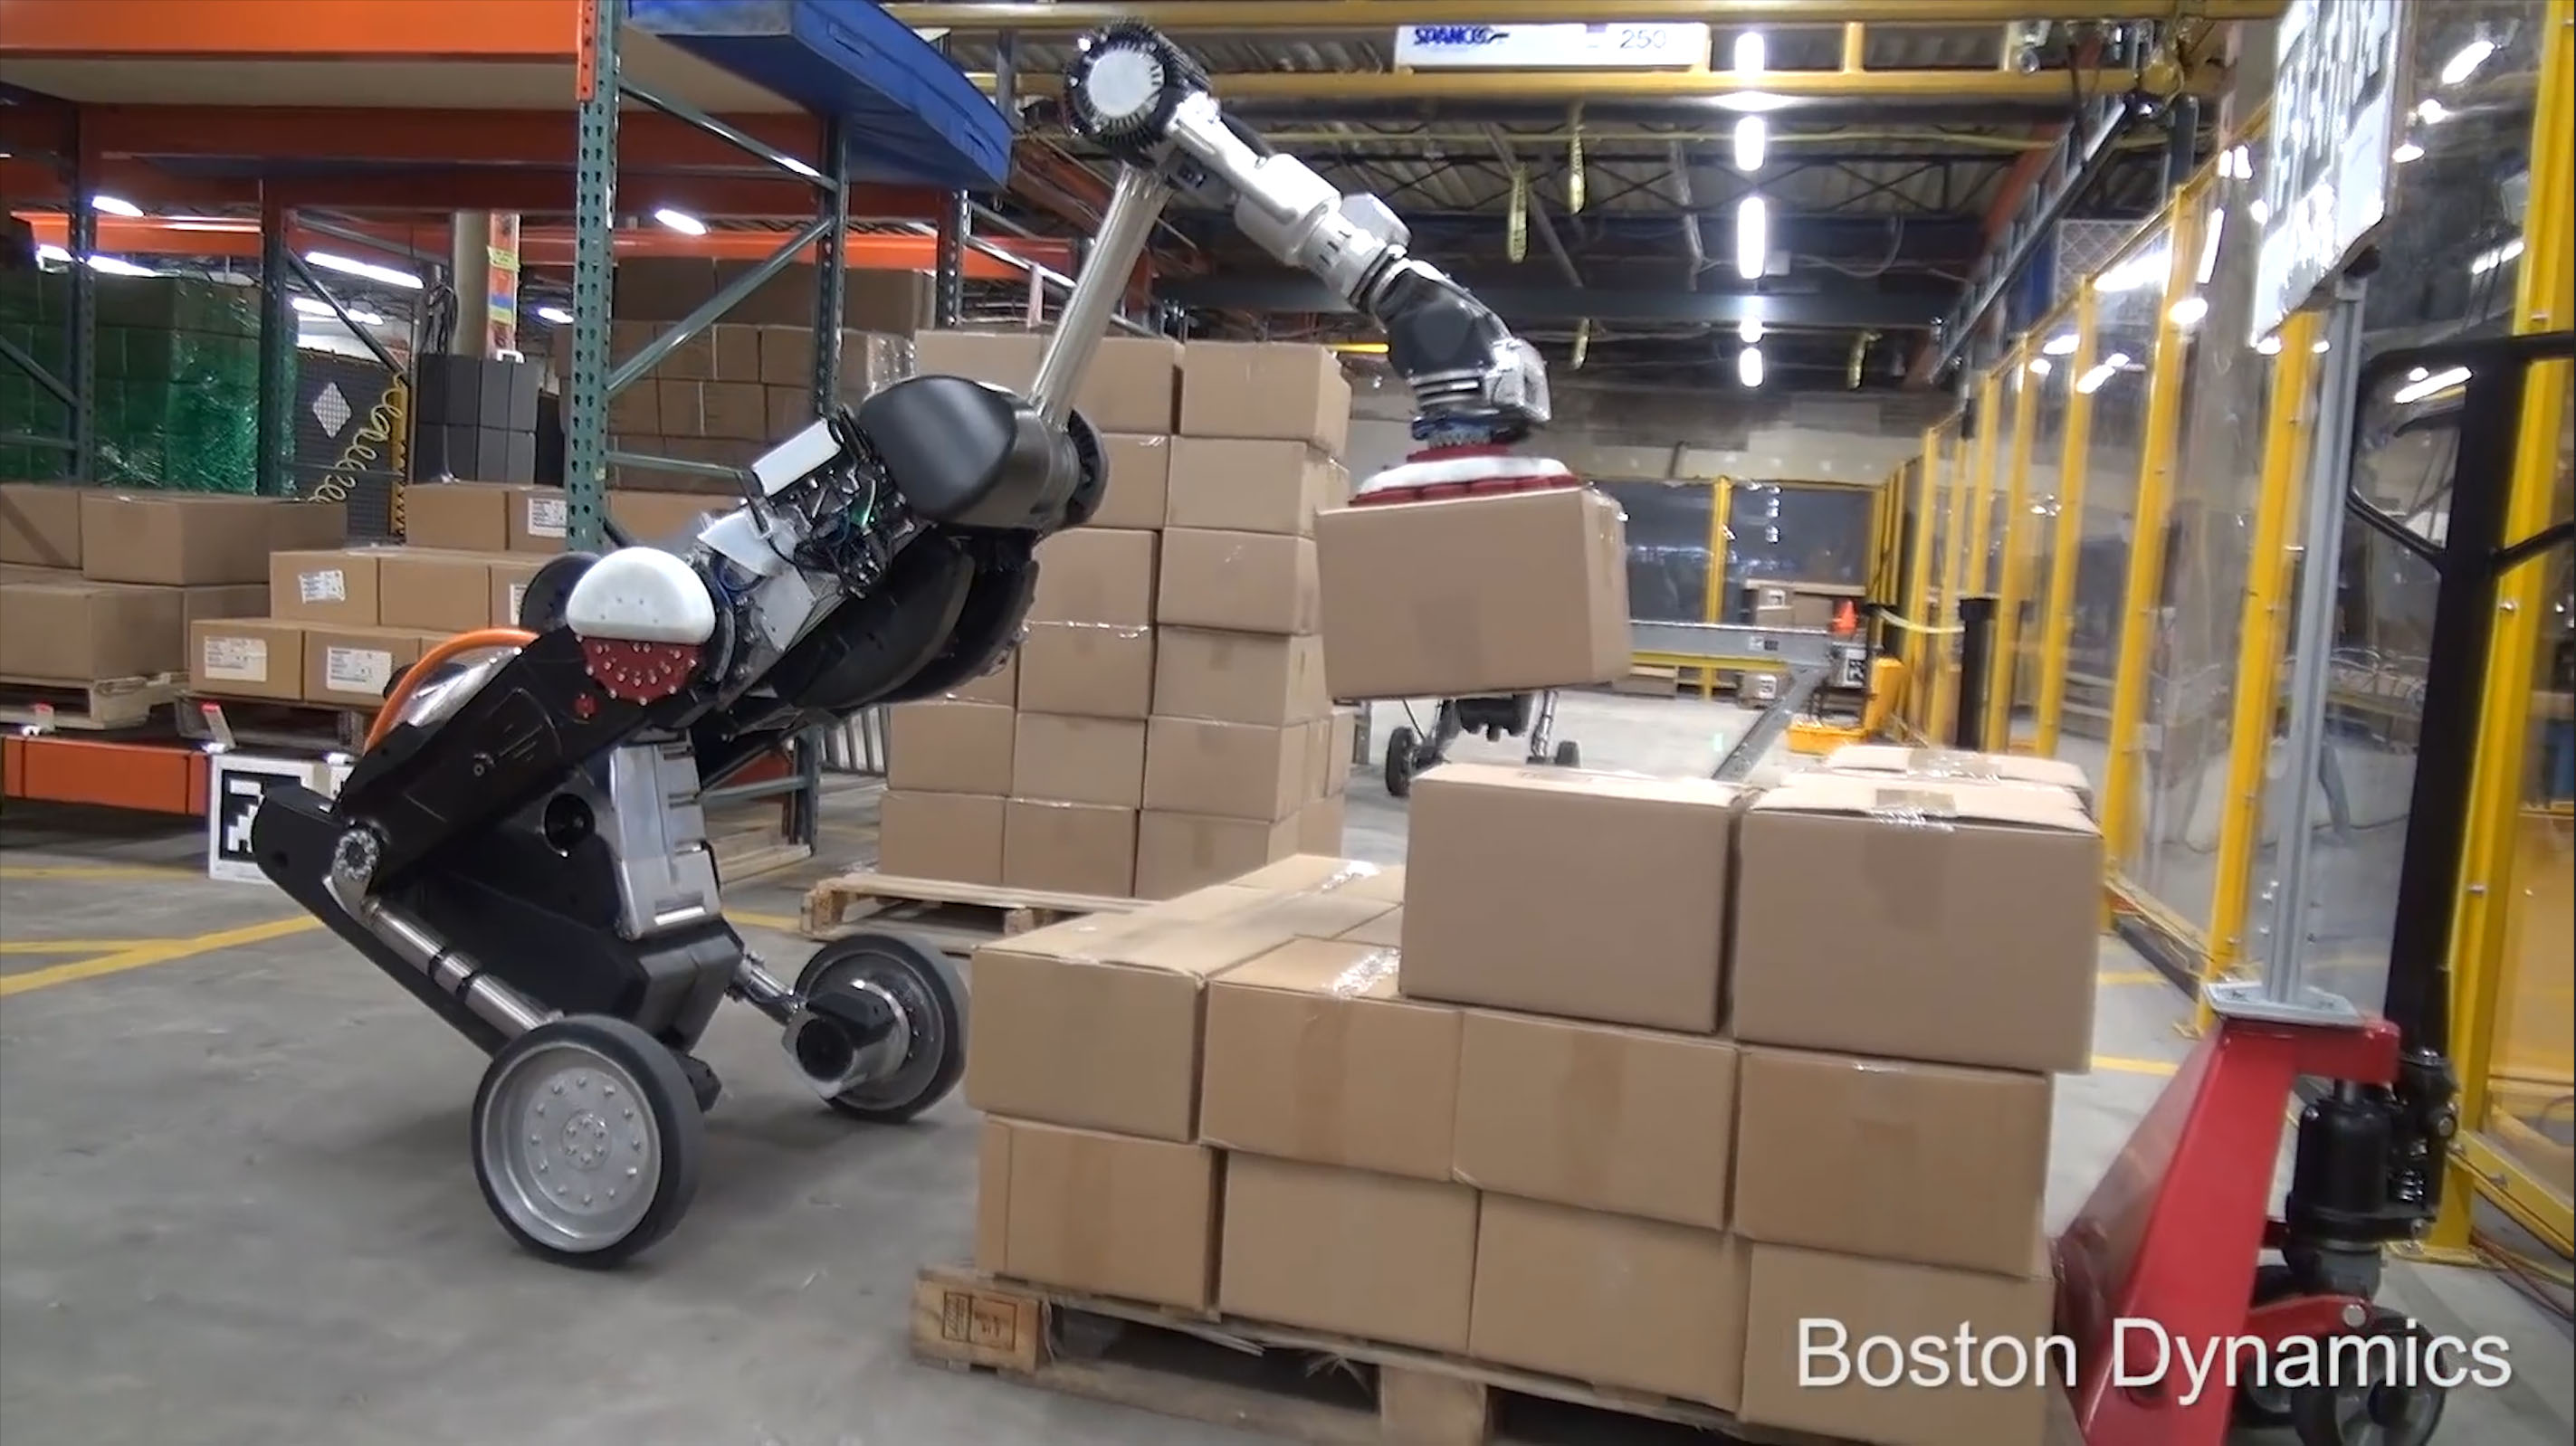 This Boston Dynamics robot is made for 